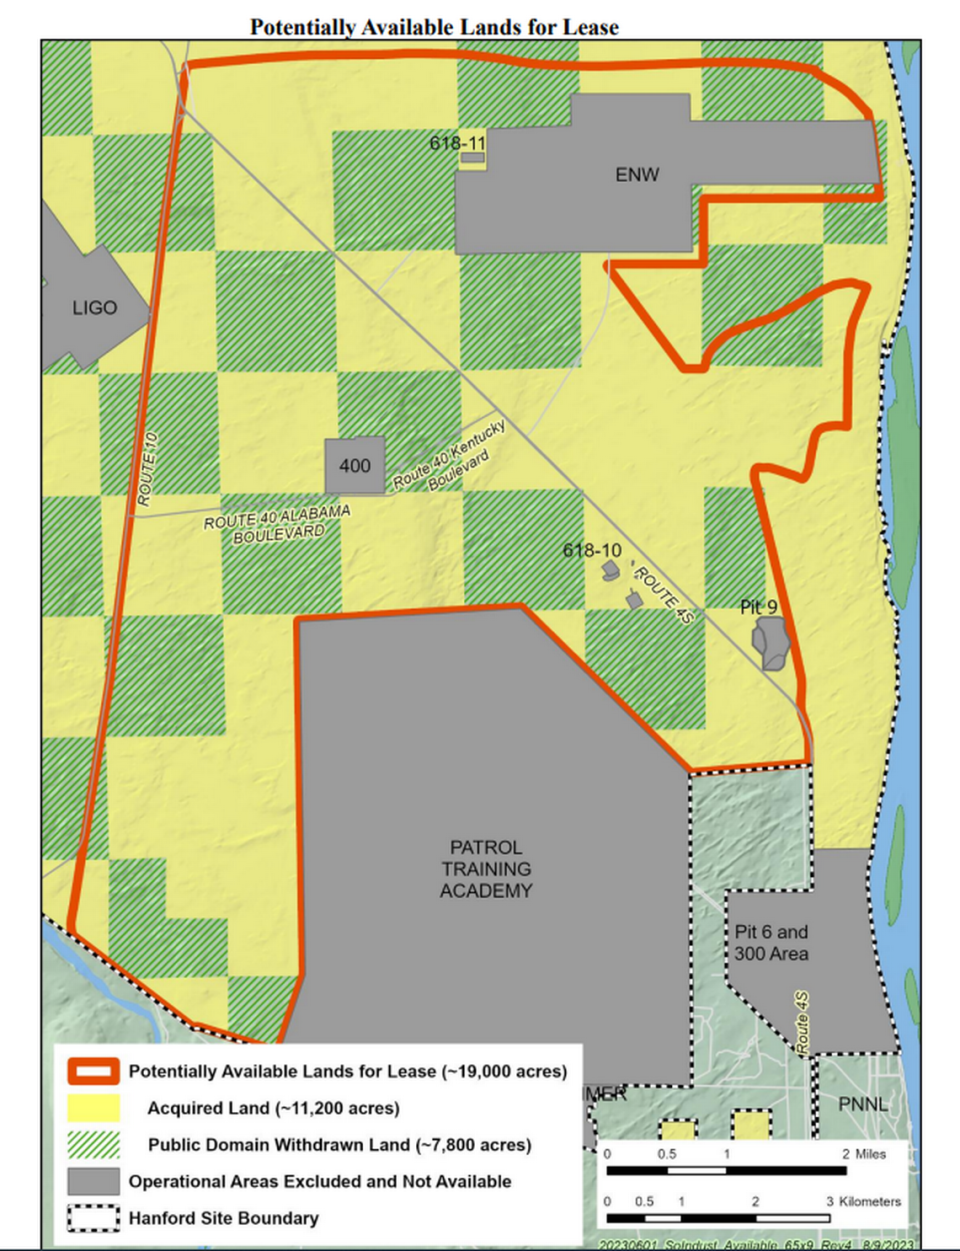 The Department of Energy released this map showing the location of 19,000 acres at the Hanford nuclear reservation proposed for clean energy generation leases.